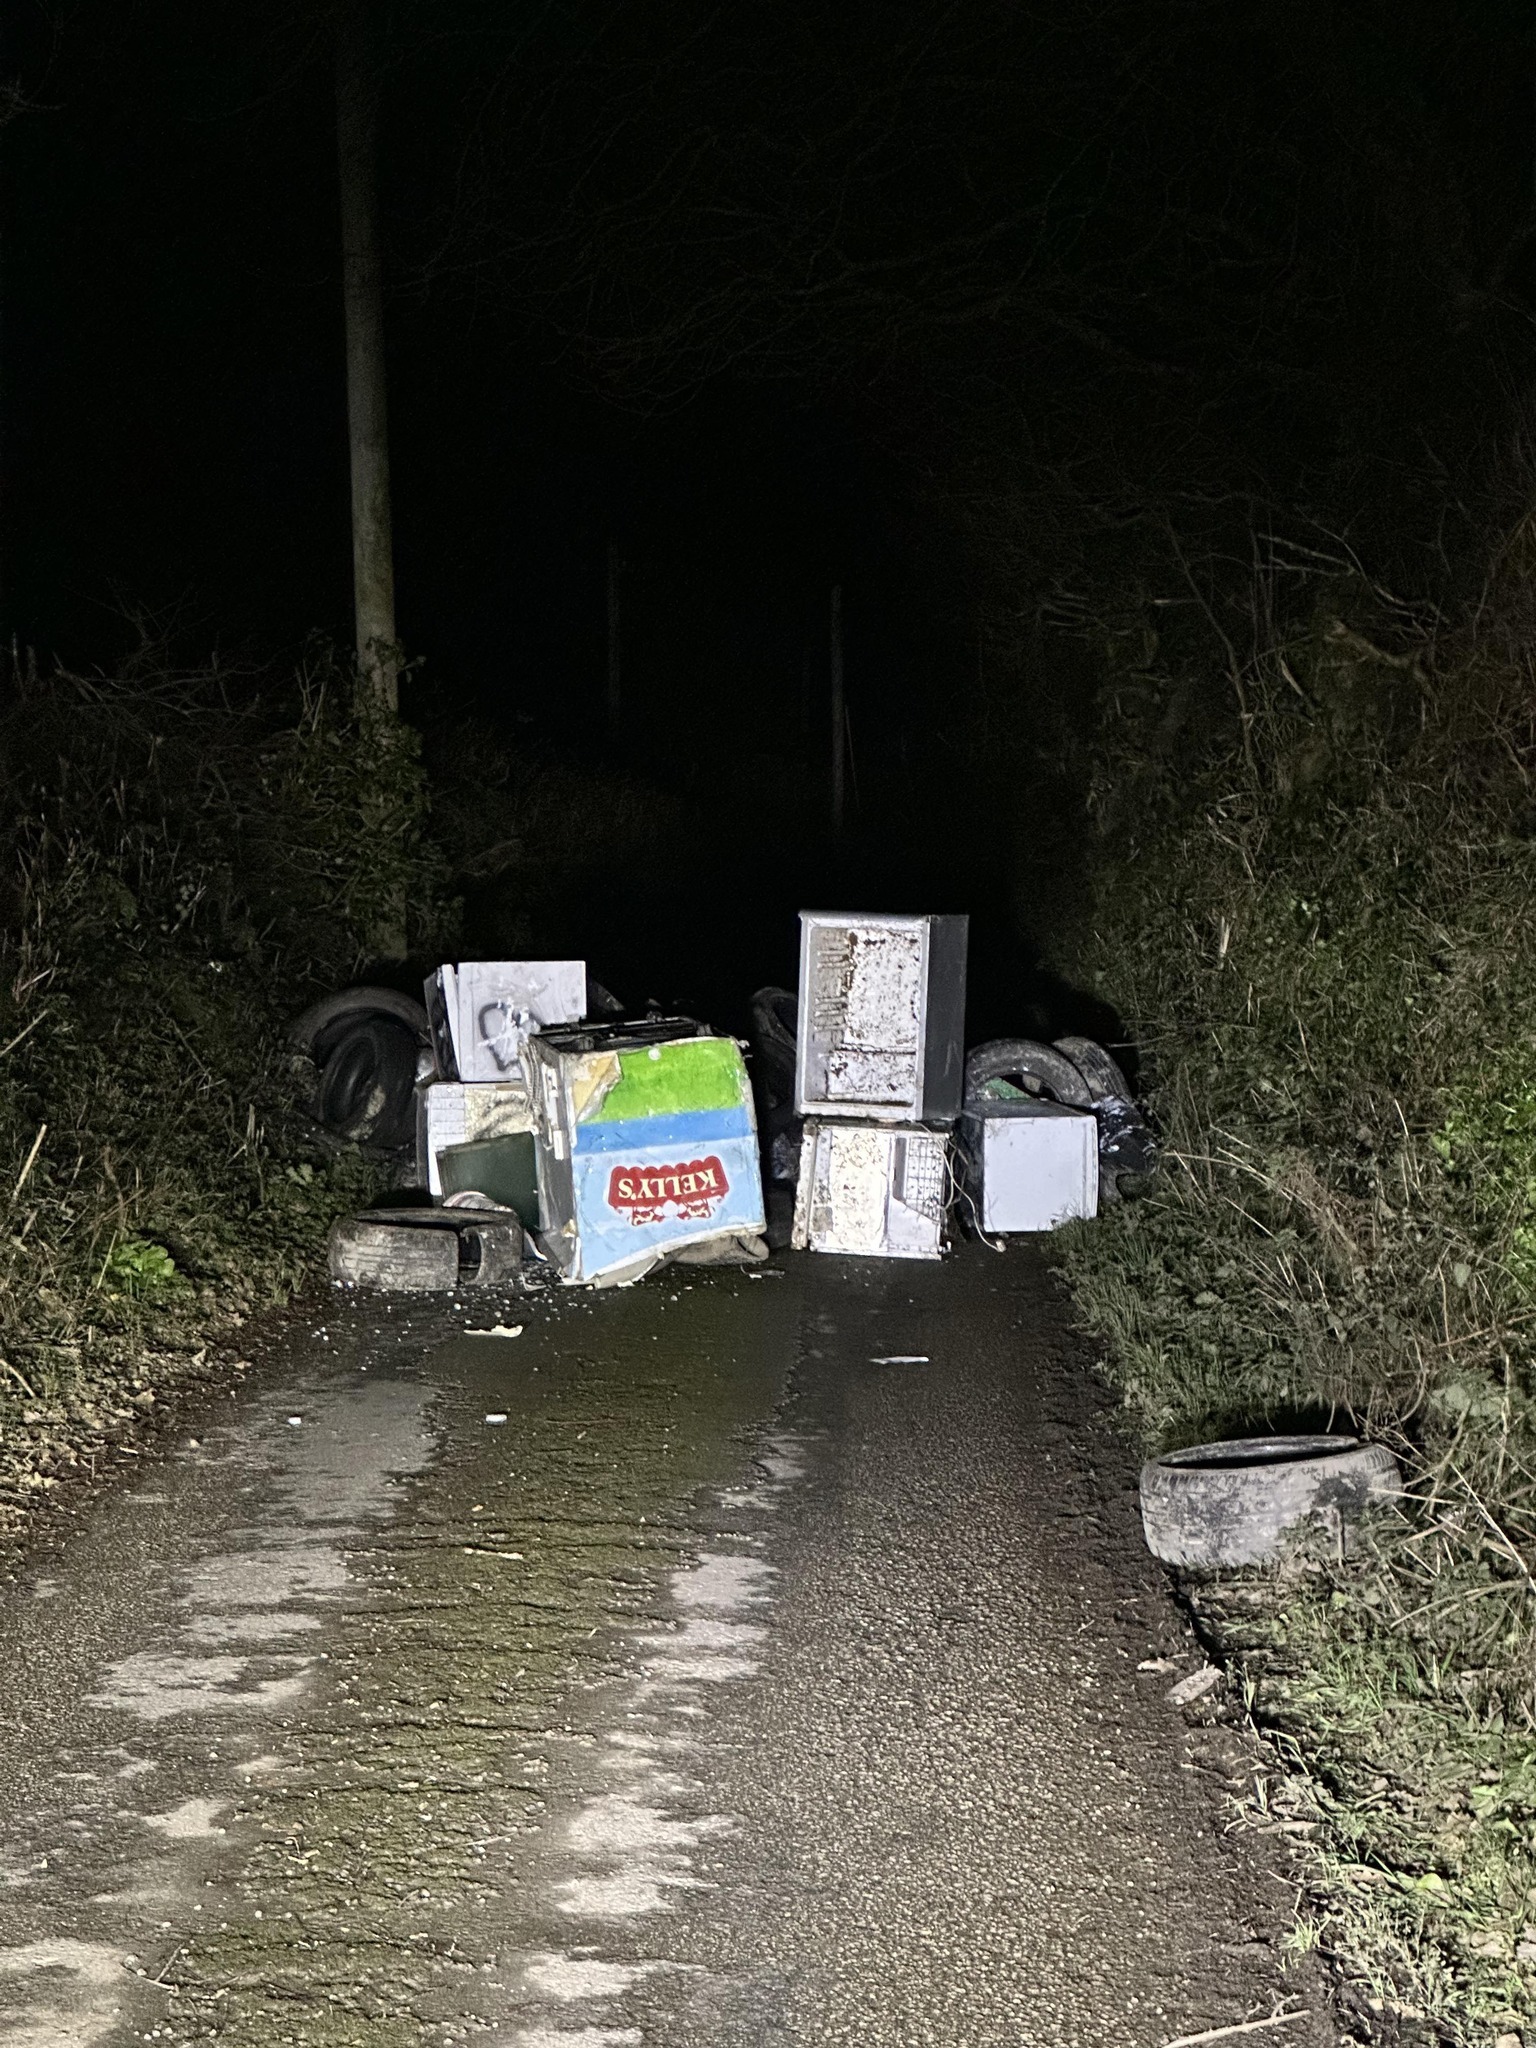 The load of commercial waste which was illegally dumped in the middle of the road near Heligan (Pic: James Mustoe)